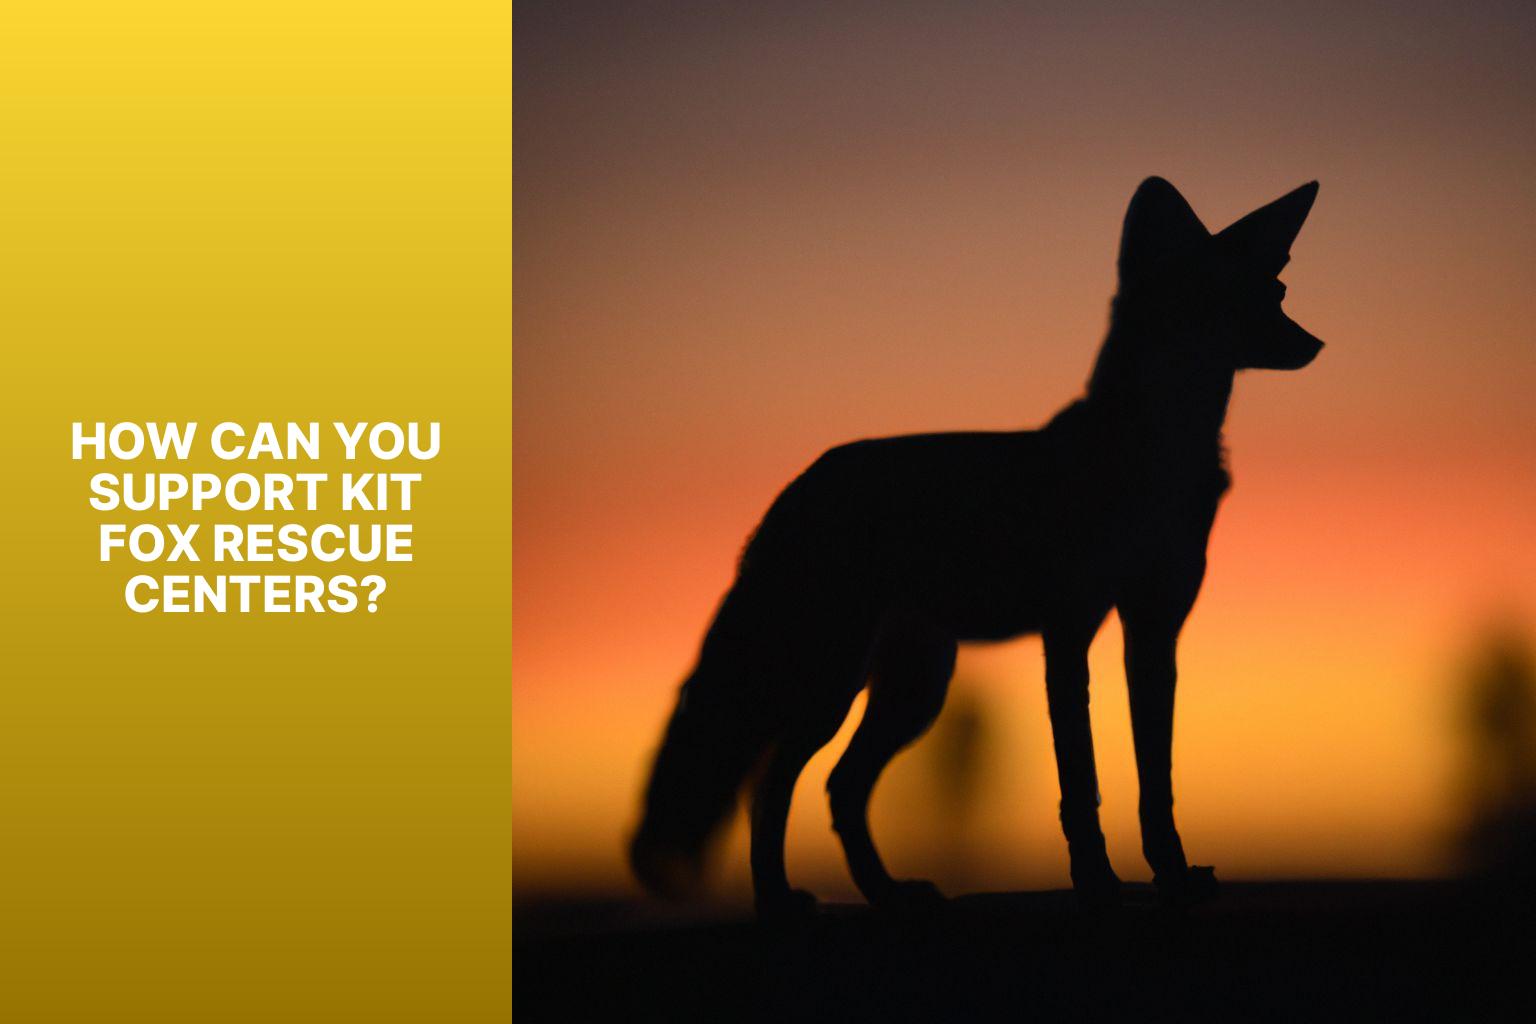 How Can You Support Kit Fox Rescue Centers? - Kit Fox Rescue Centers 